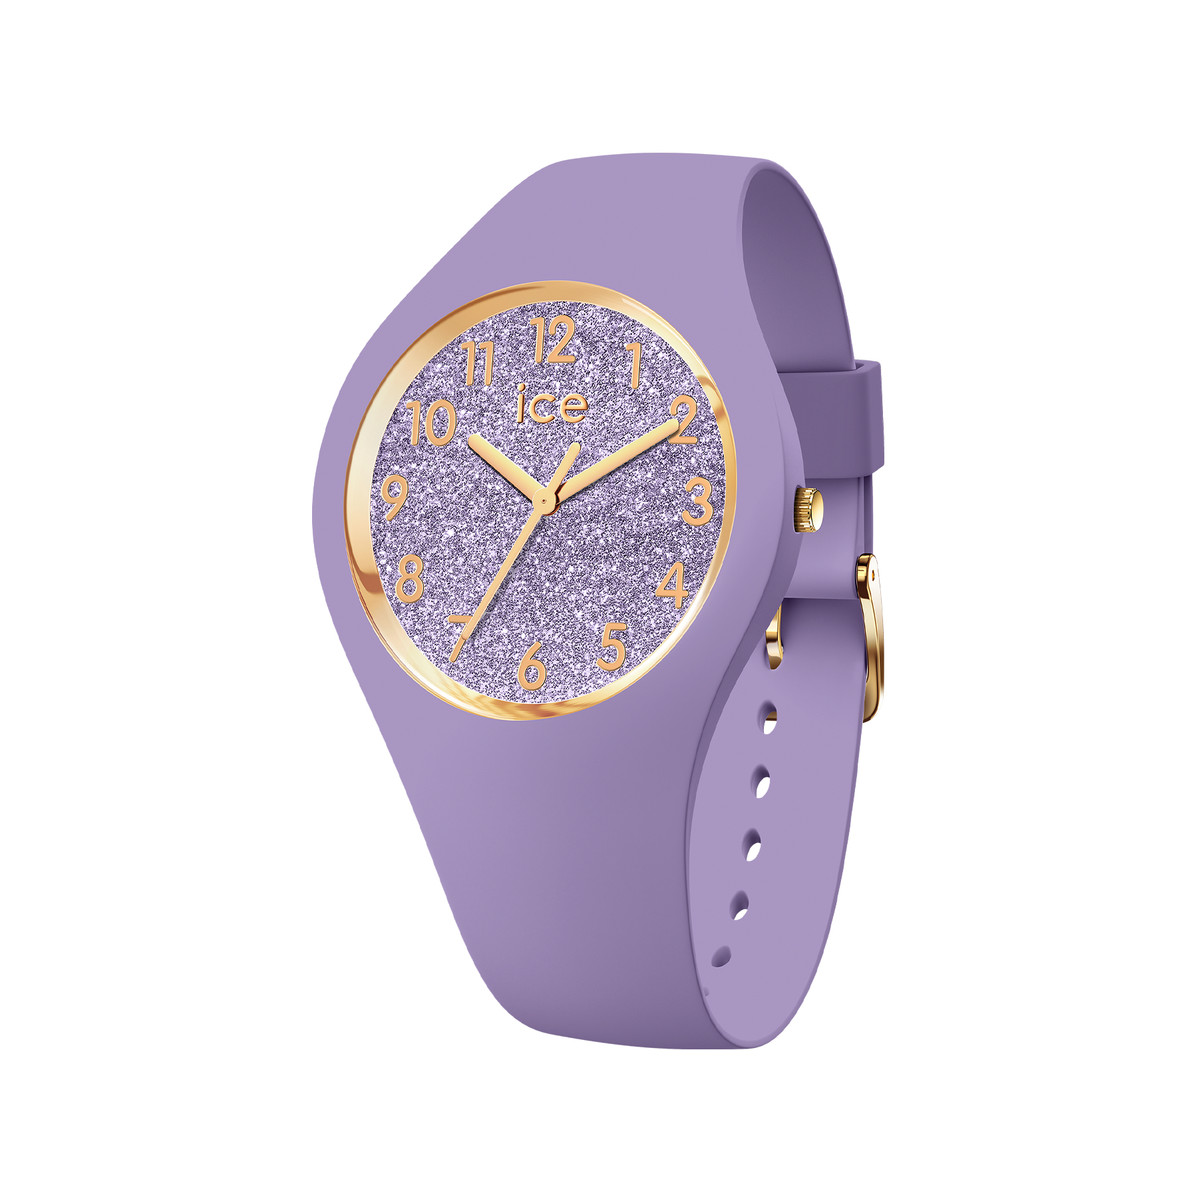 Montre ICE WATCH ice glitter femme bracelet silicone lilas